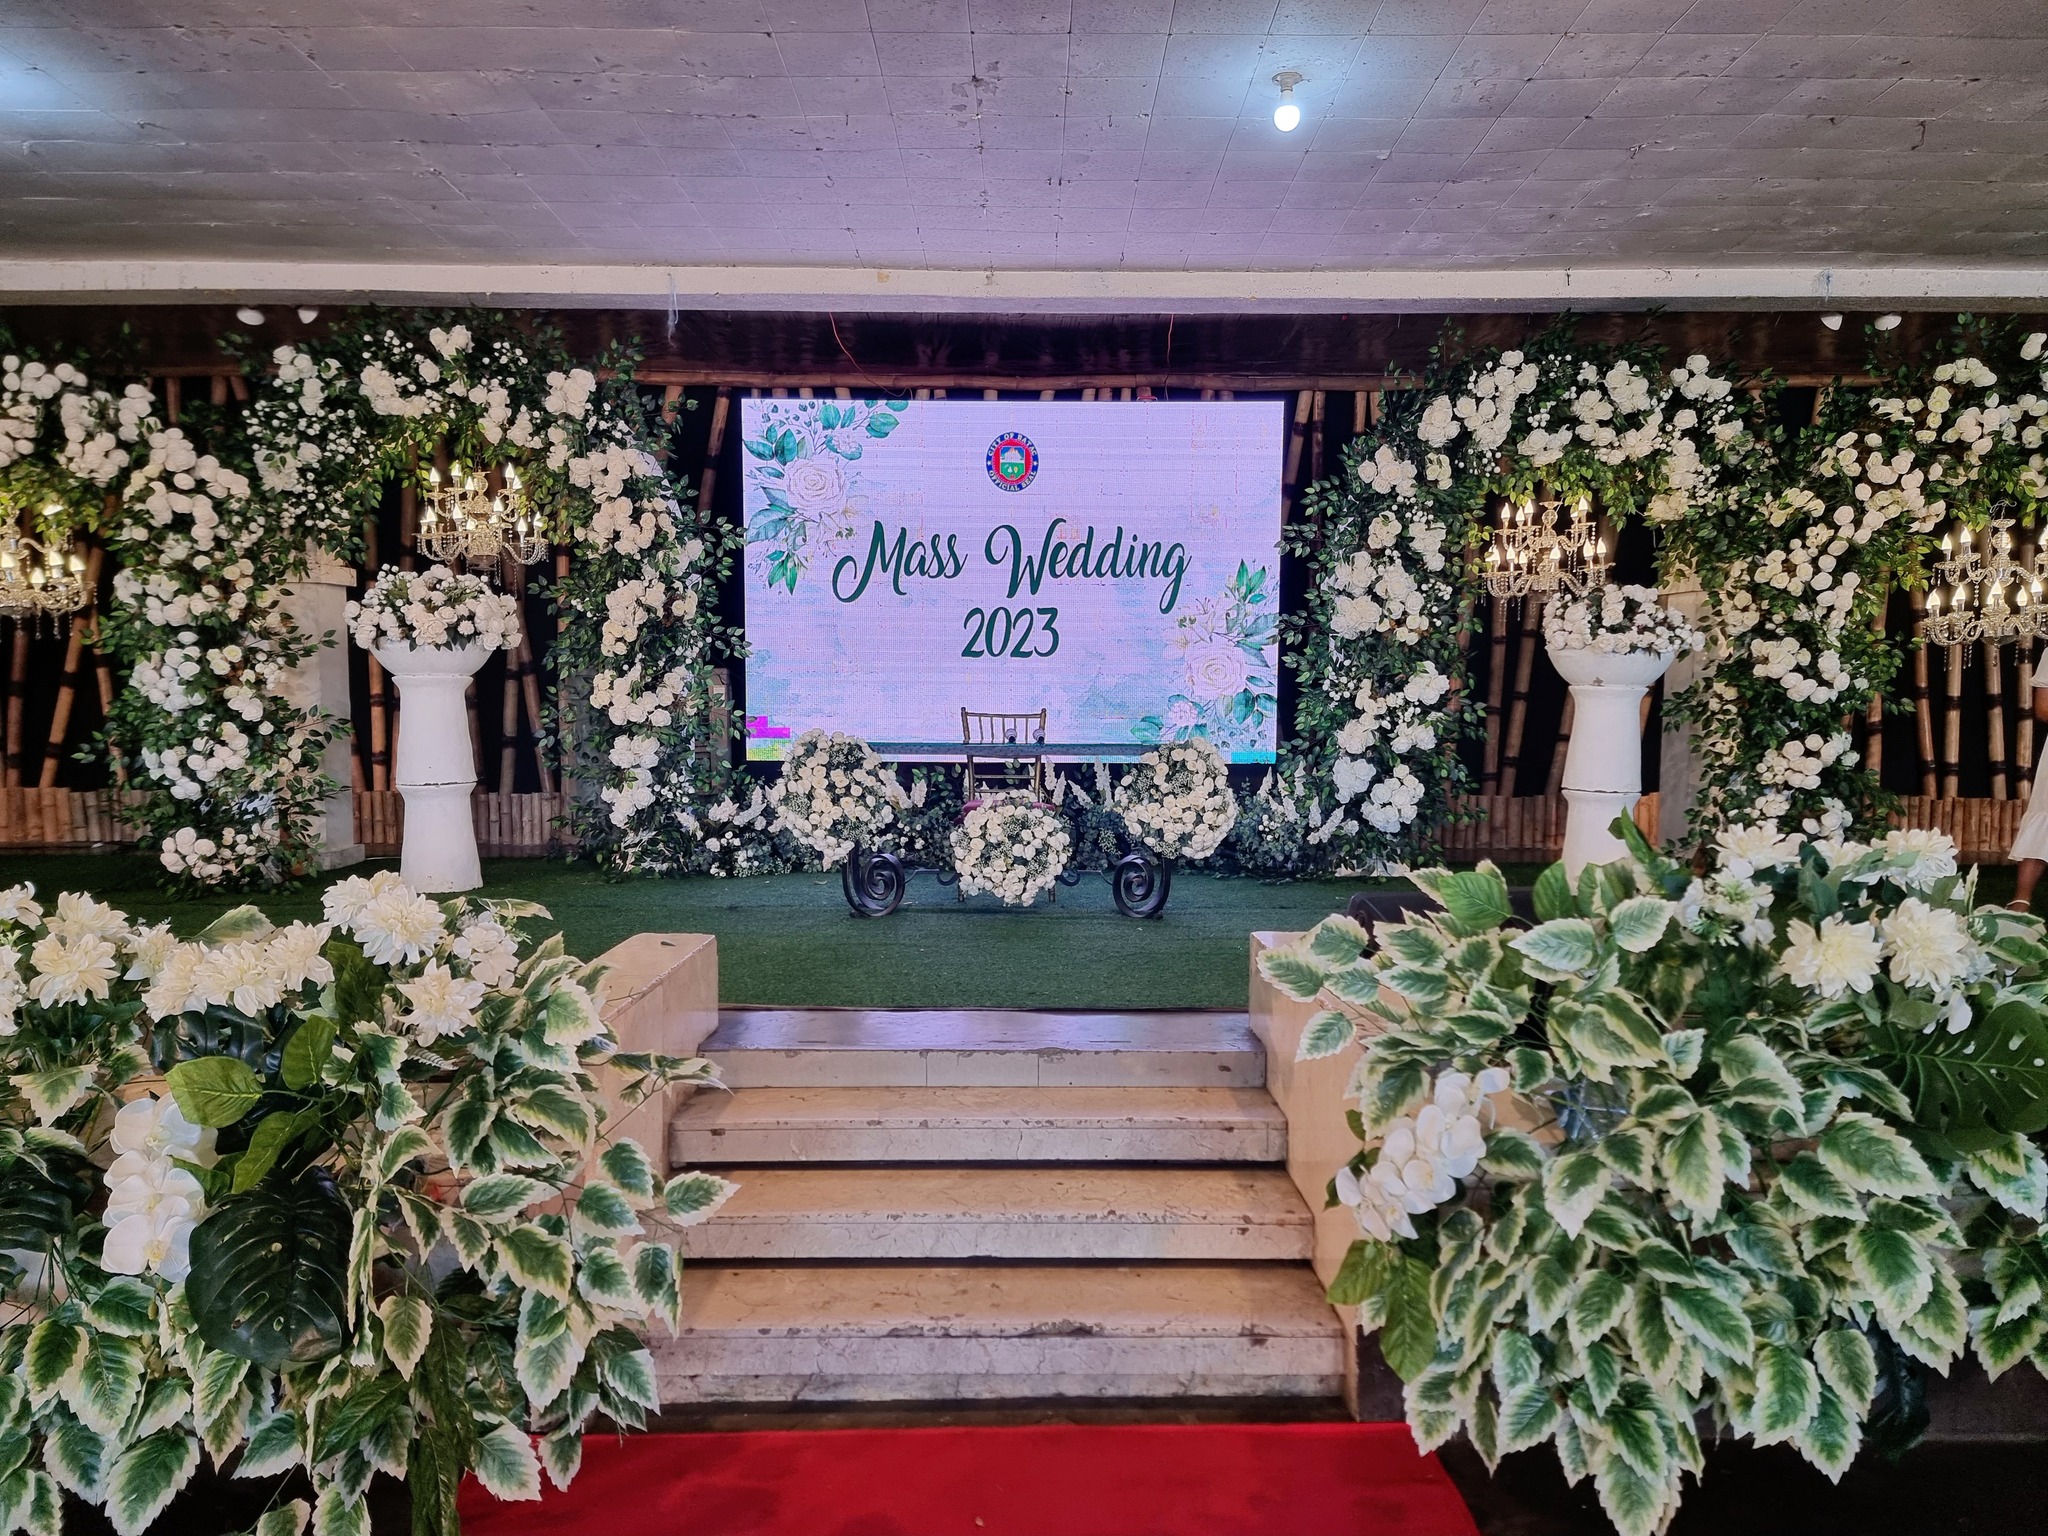 CITY GOVERNMENT OF BATAC HOSTS REMARKABLE MASS WEDDING FOR 40 COUPLES